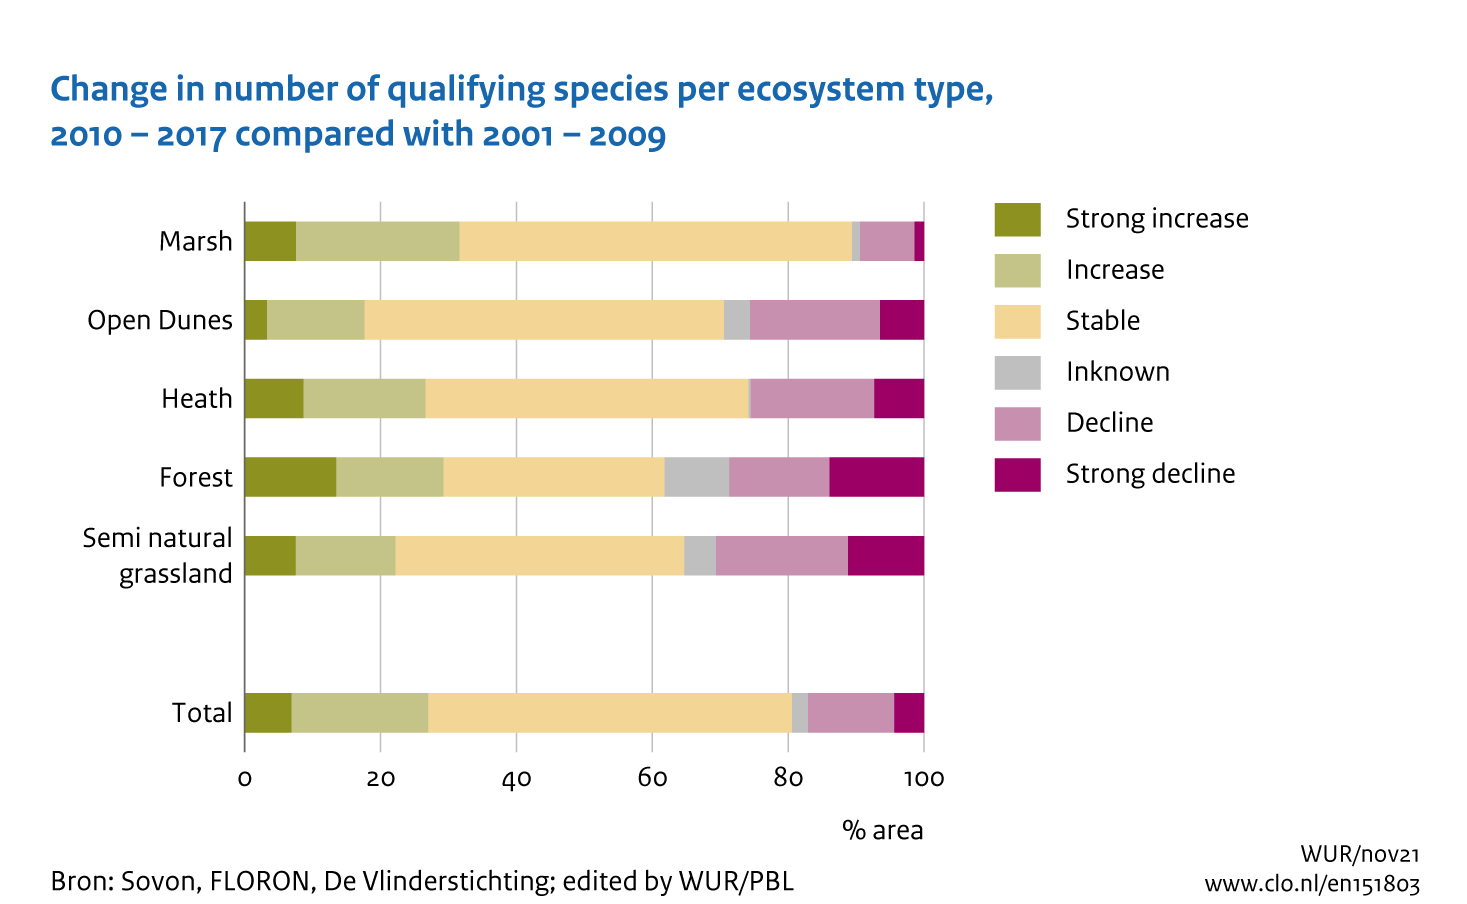 Image Change in number of qualifying species per ecosystem type, 2010-2017 compared with 2001-2009. The image is further explained in the text.